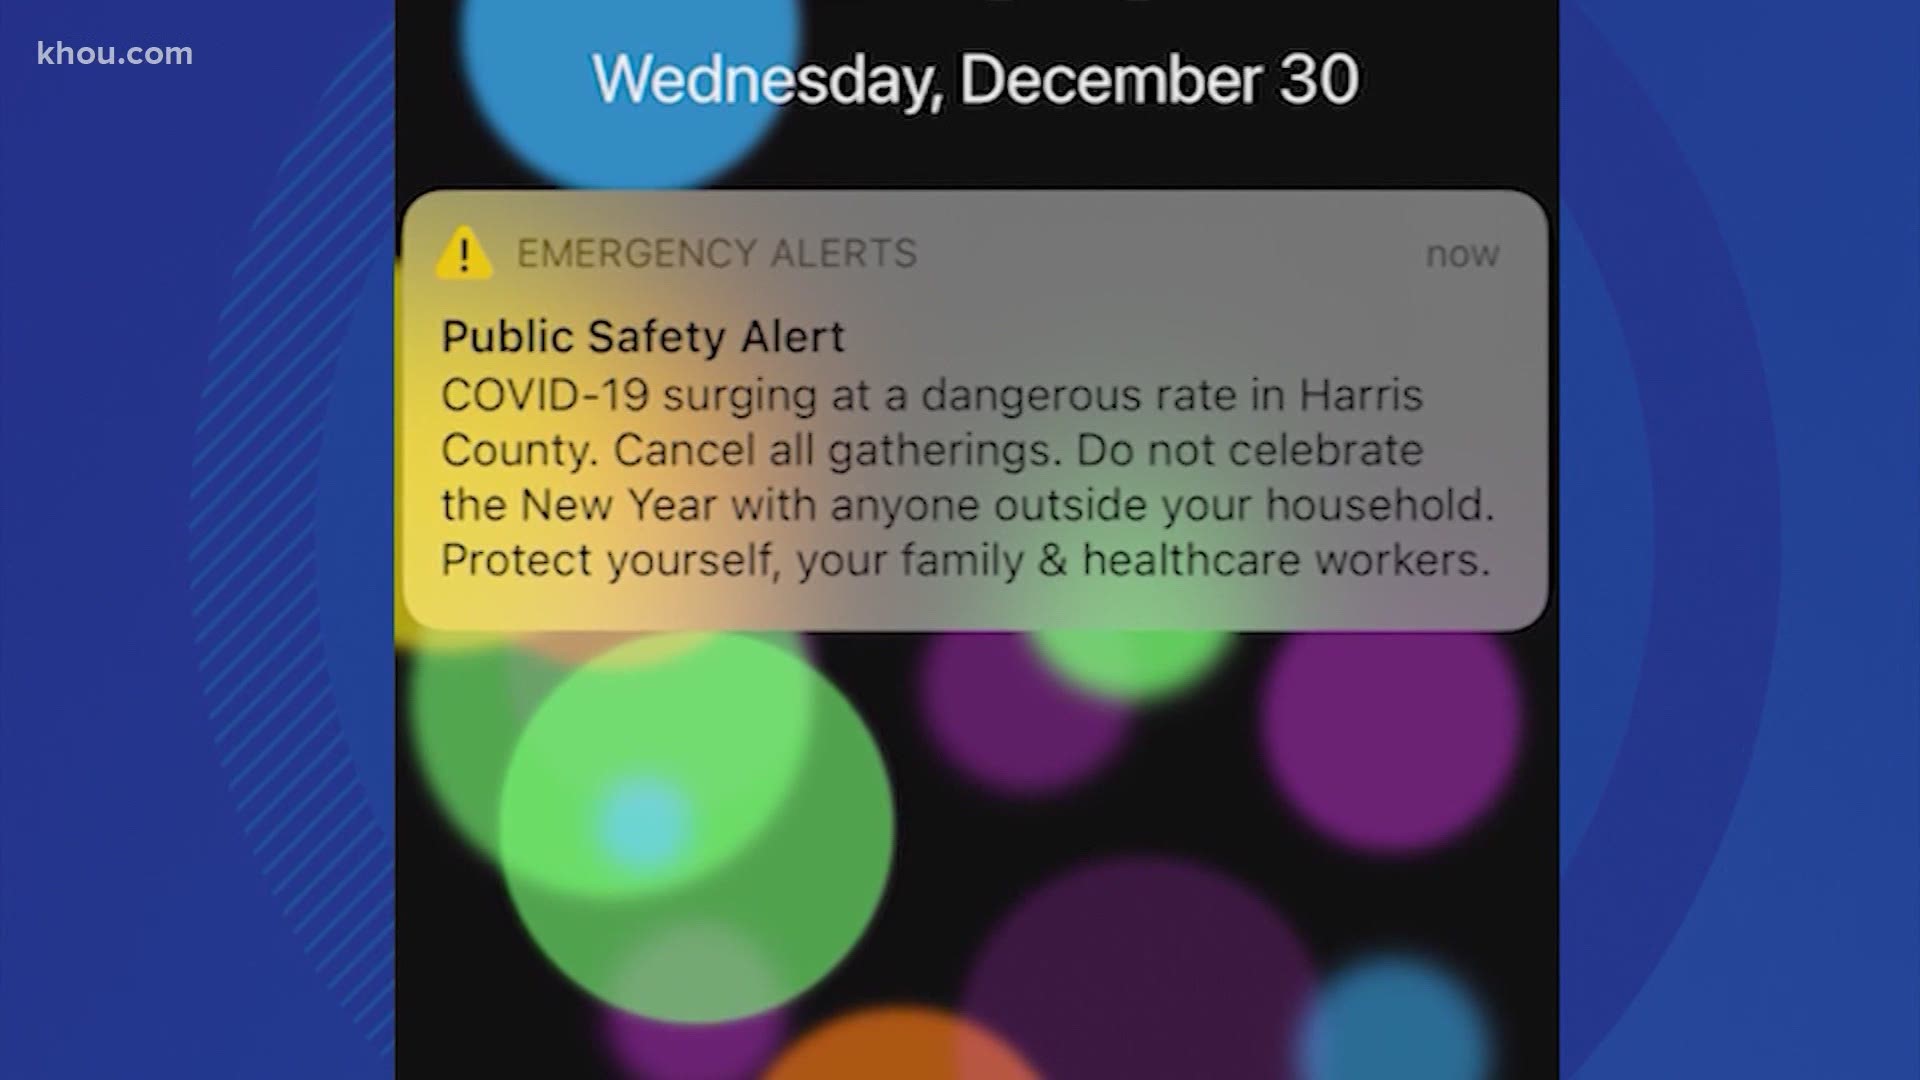 Despite the county's emergency warning to cancel New Year's Eve gatherings, some still plan to celebrate.